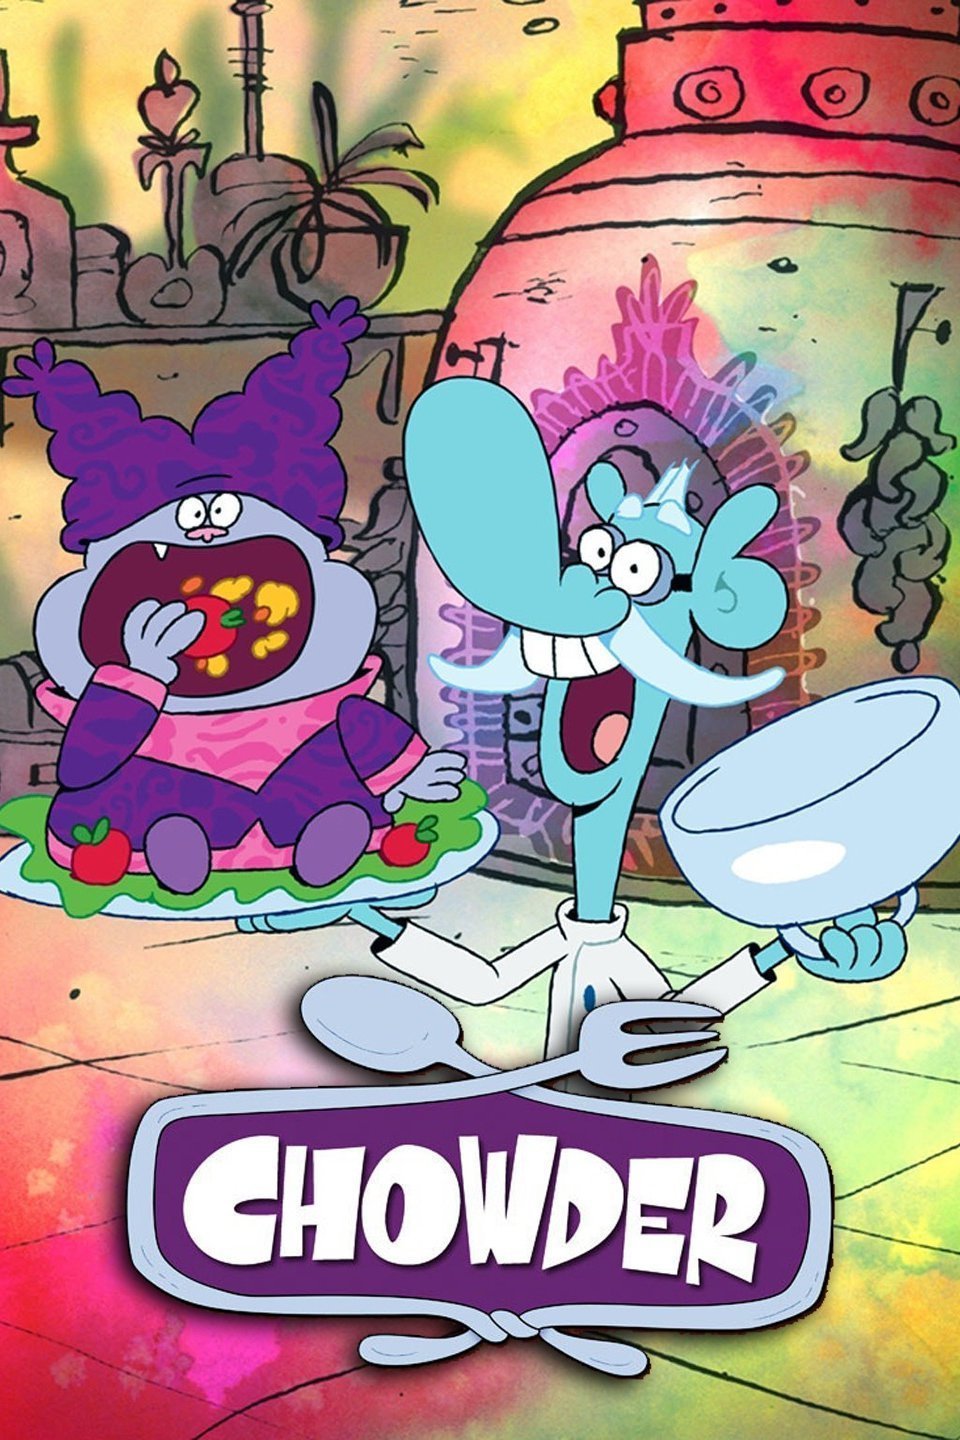 https://static.wikia.nocookie.net/iepfanon/images/c/c4/Chowder_-_Poster.jpg/revision/latest?cb=20230718231324